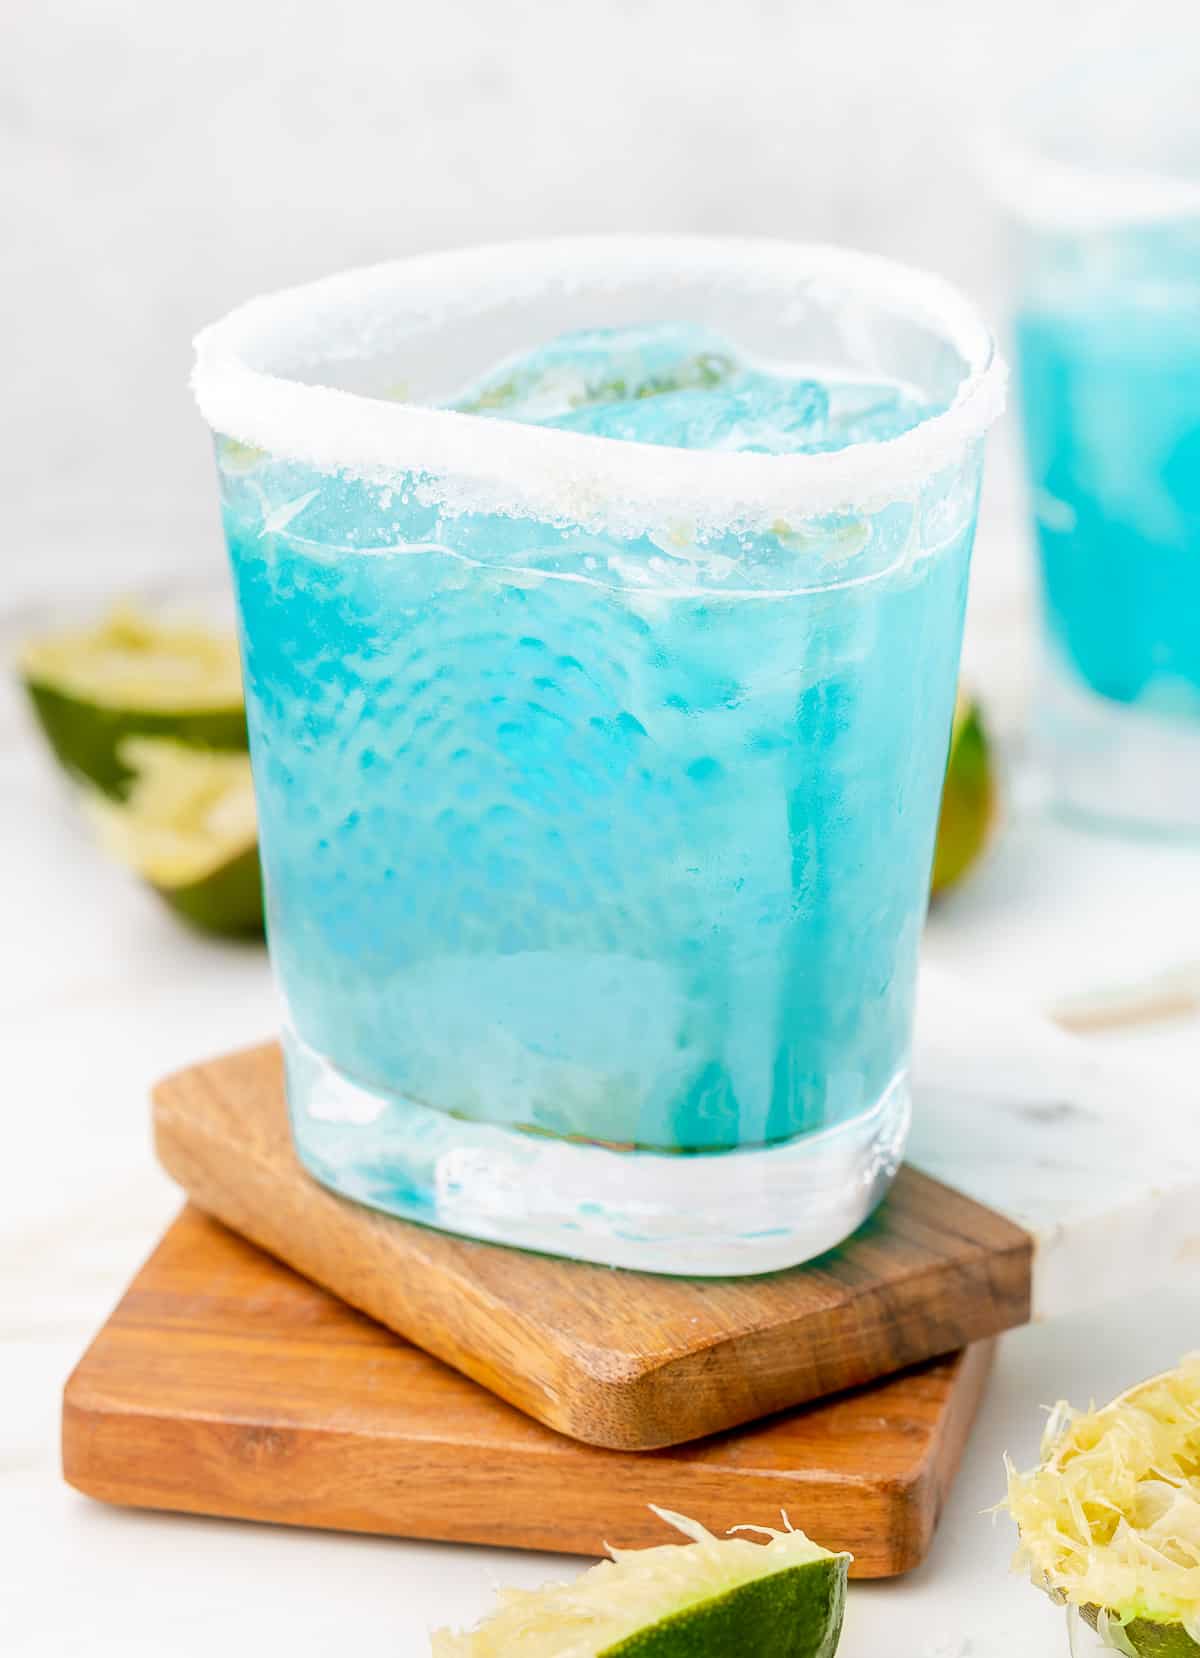 Margarita azul in a sugar rimmed glass, with limes for garnish.